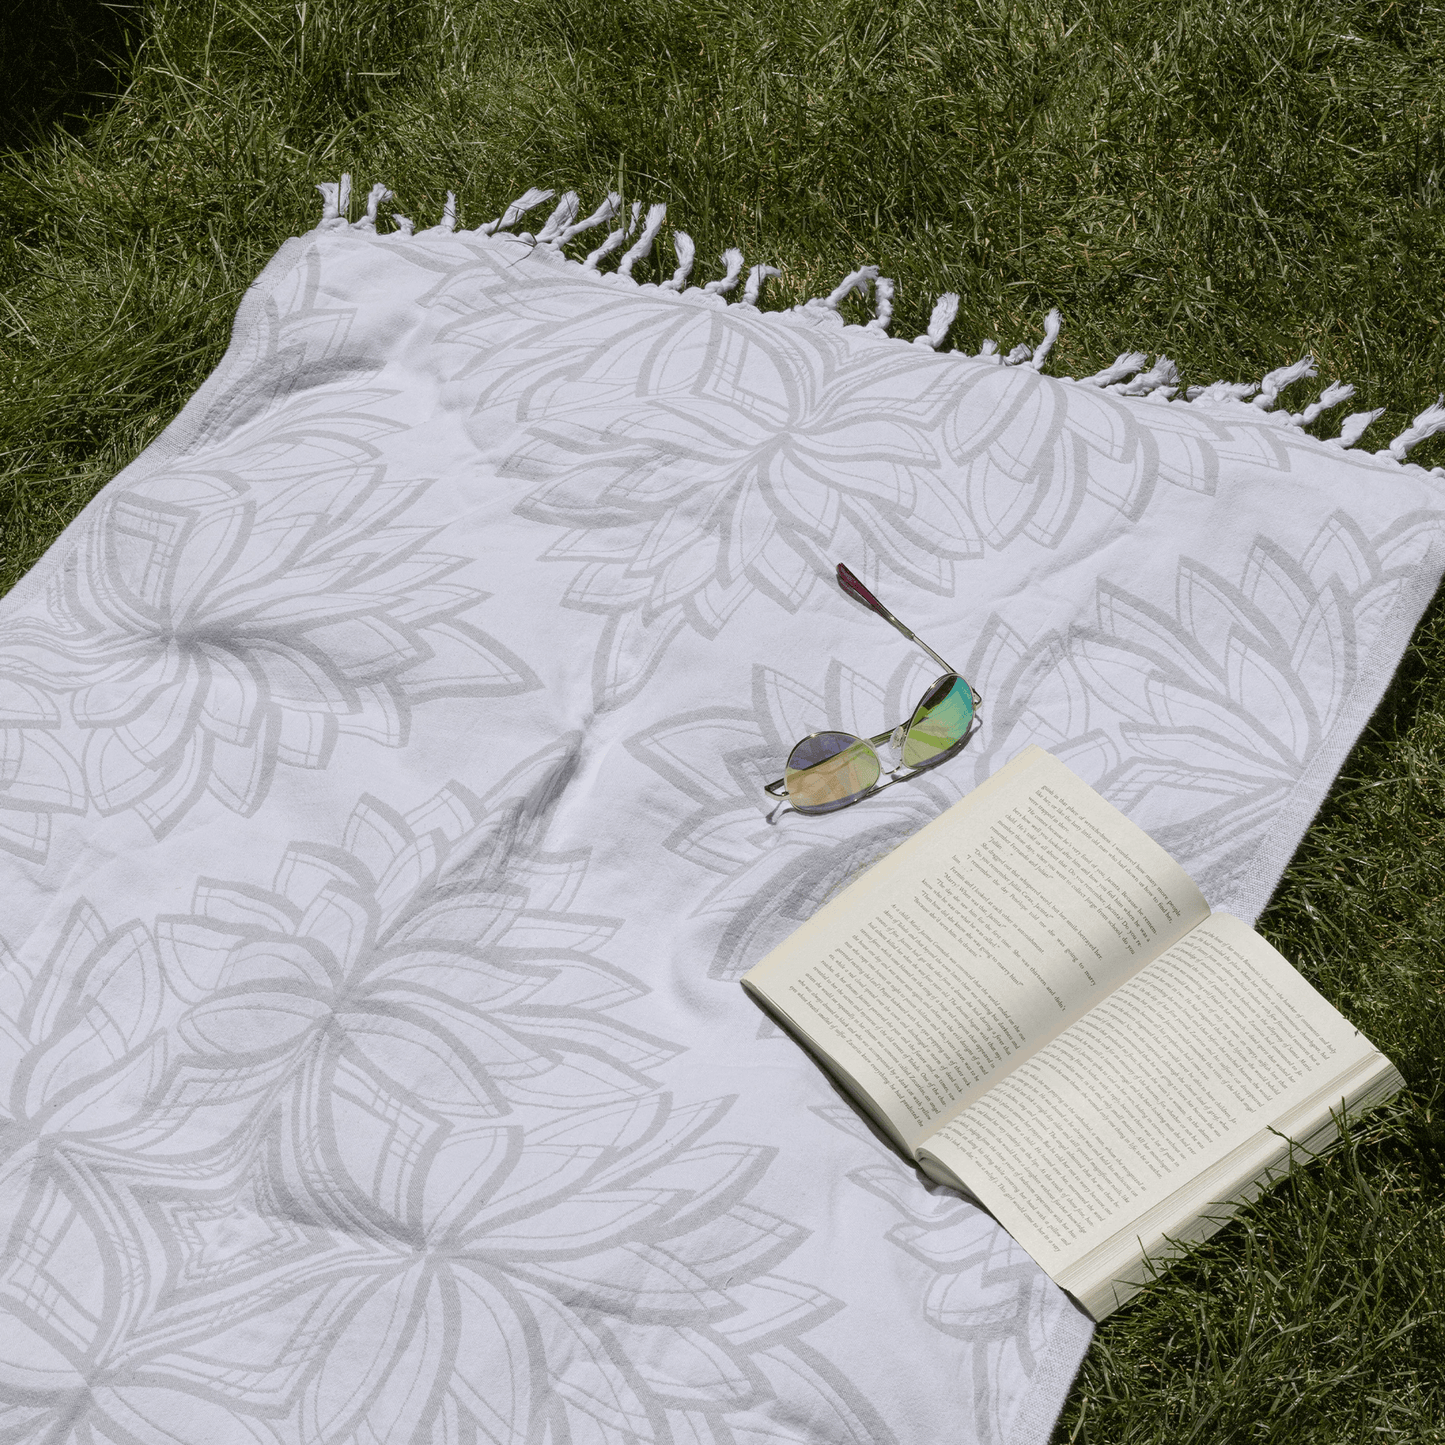 Grey and white Turkish towel in the summer with a book